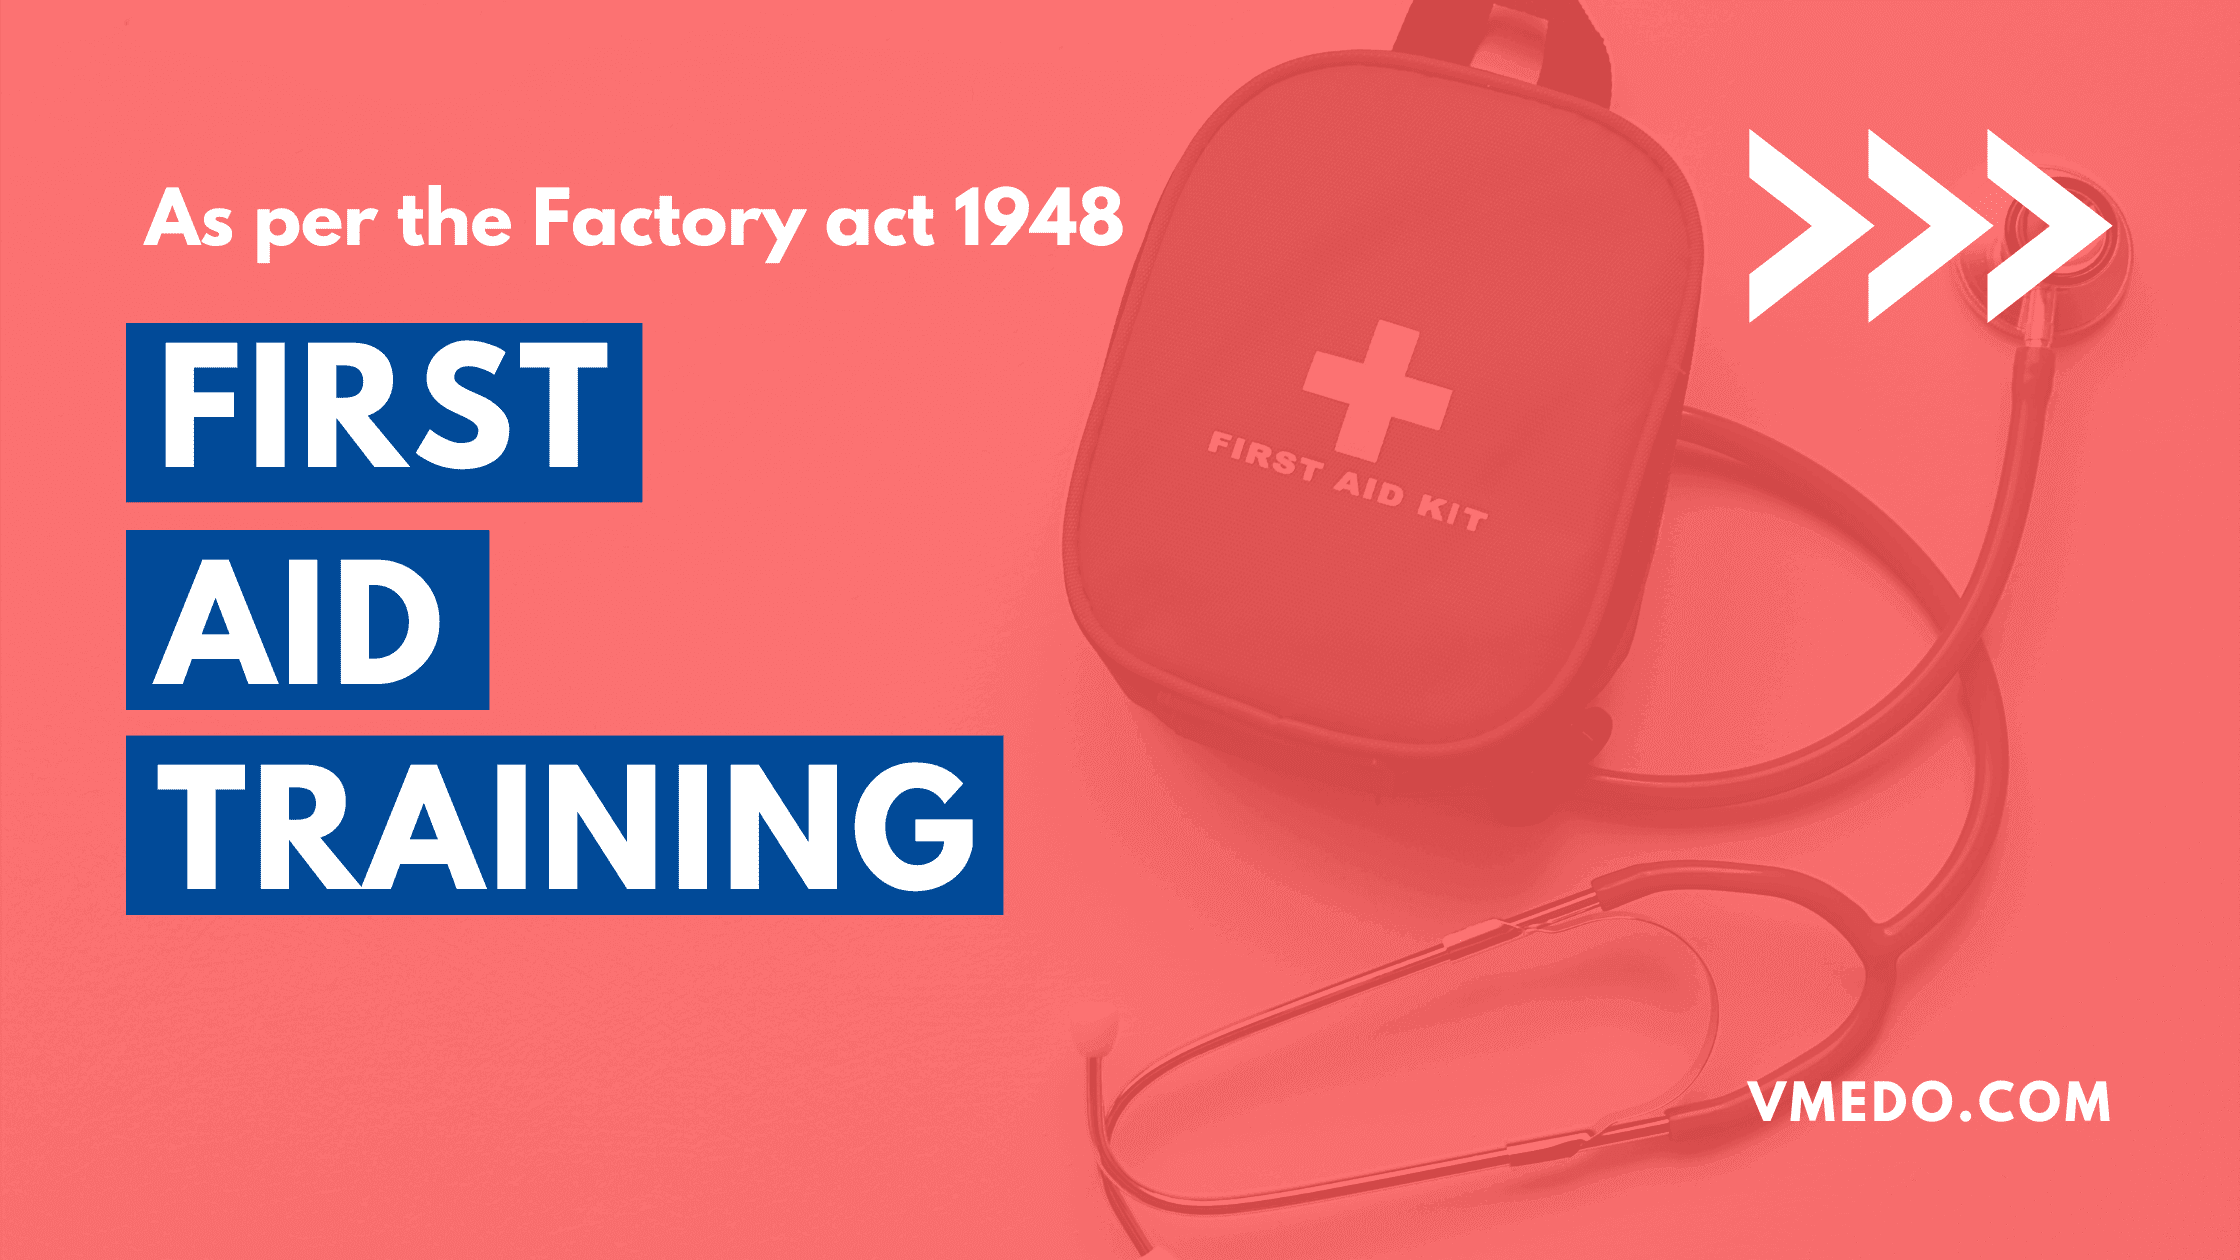 first aid training as per factories act 1948